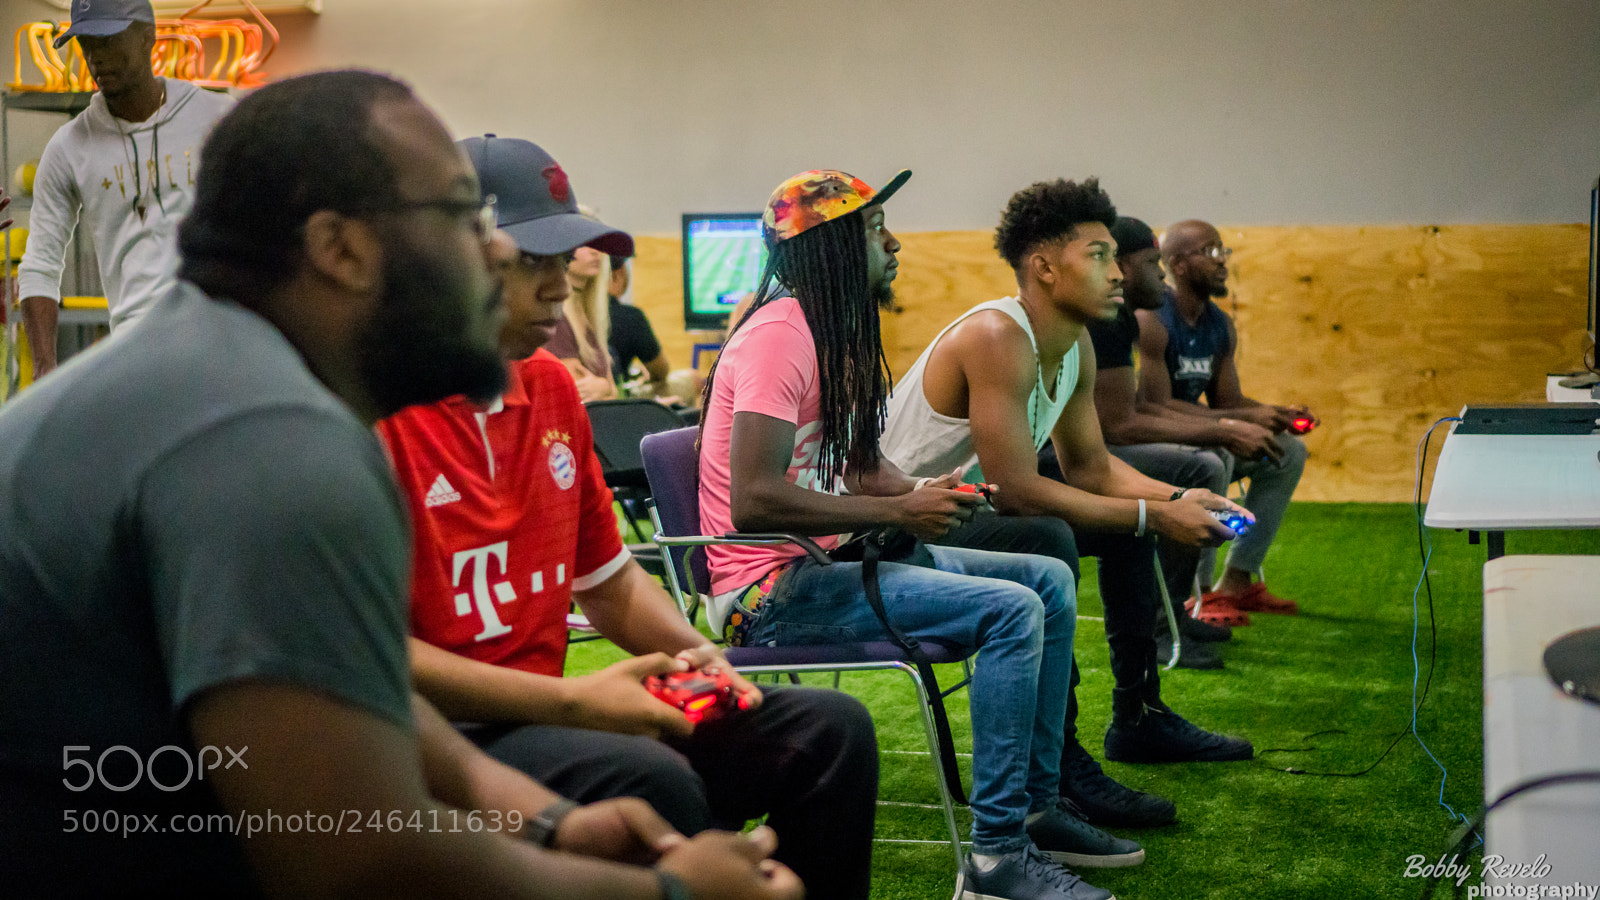 Sony a6500 sample photo. Game bullys event photography